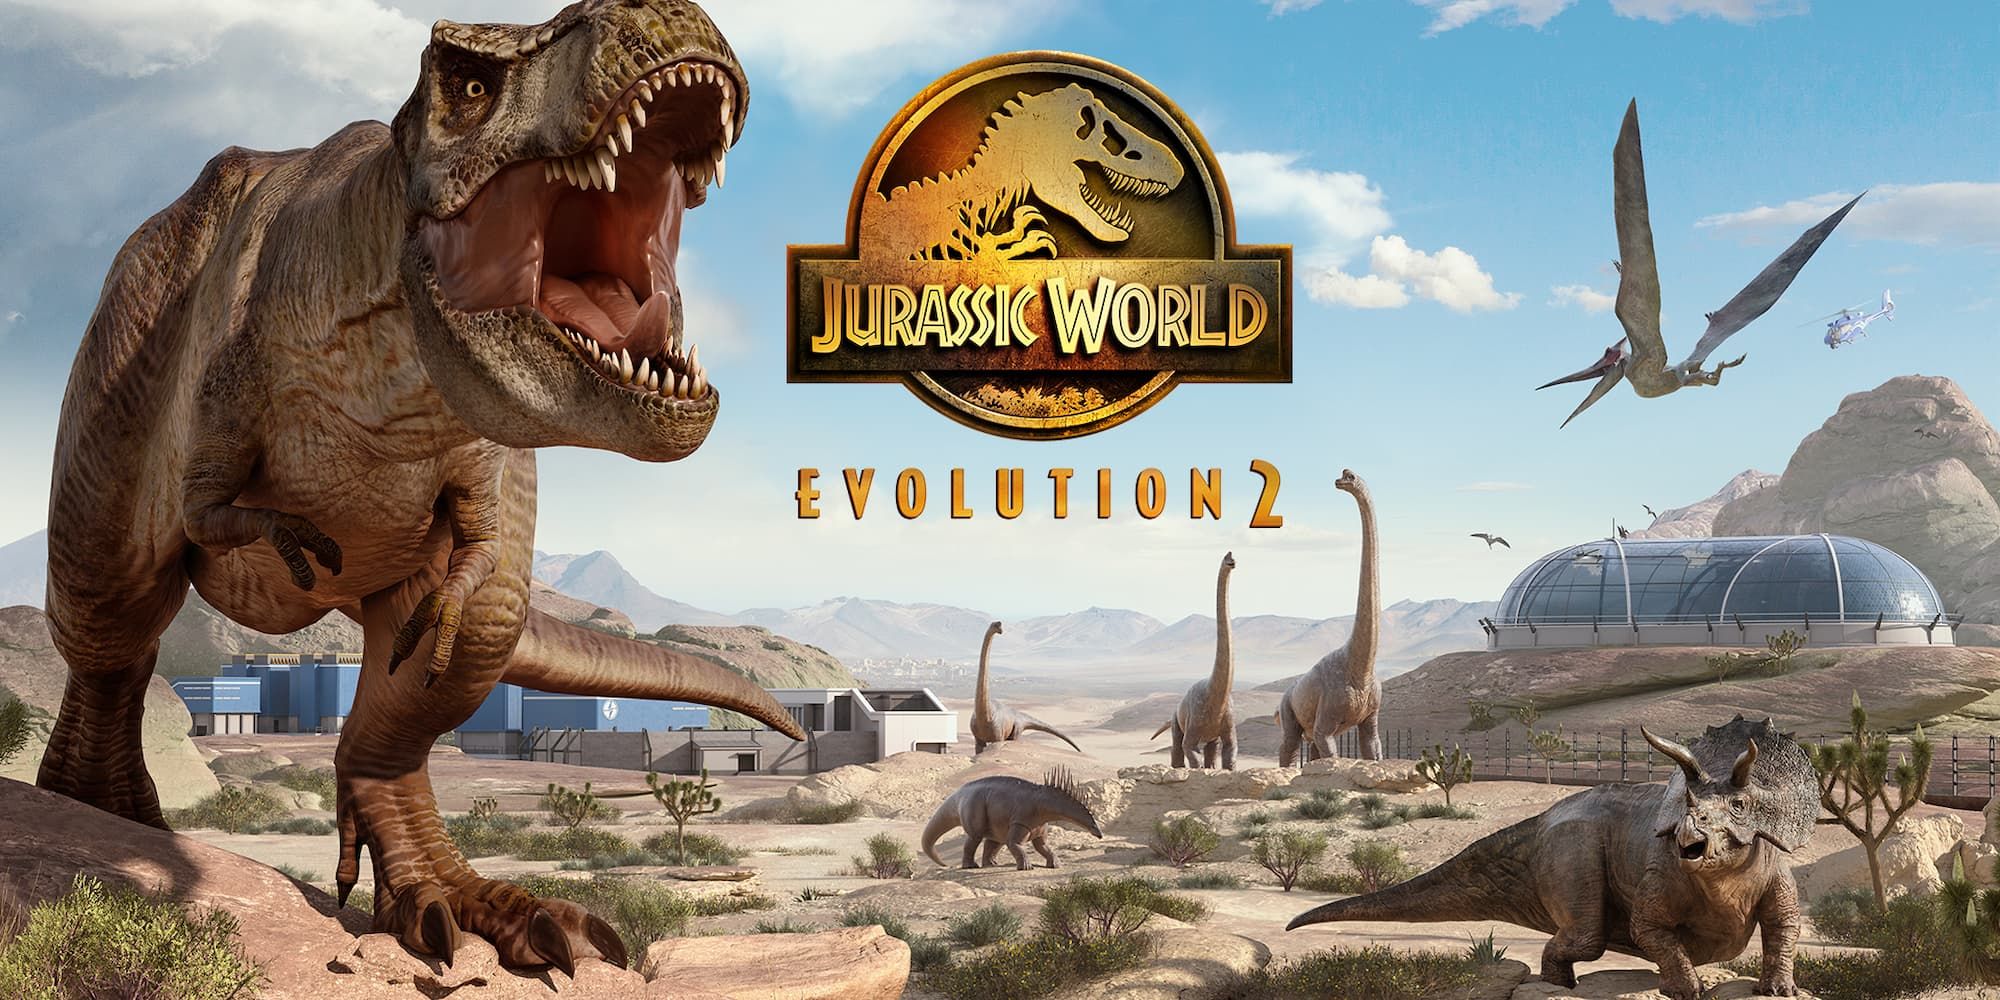 A T-Rex and other dinosaurs travel through a desert-like biome in an official image for Jurassic World Evolution 2.